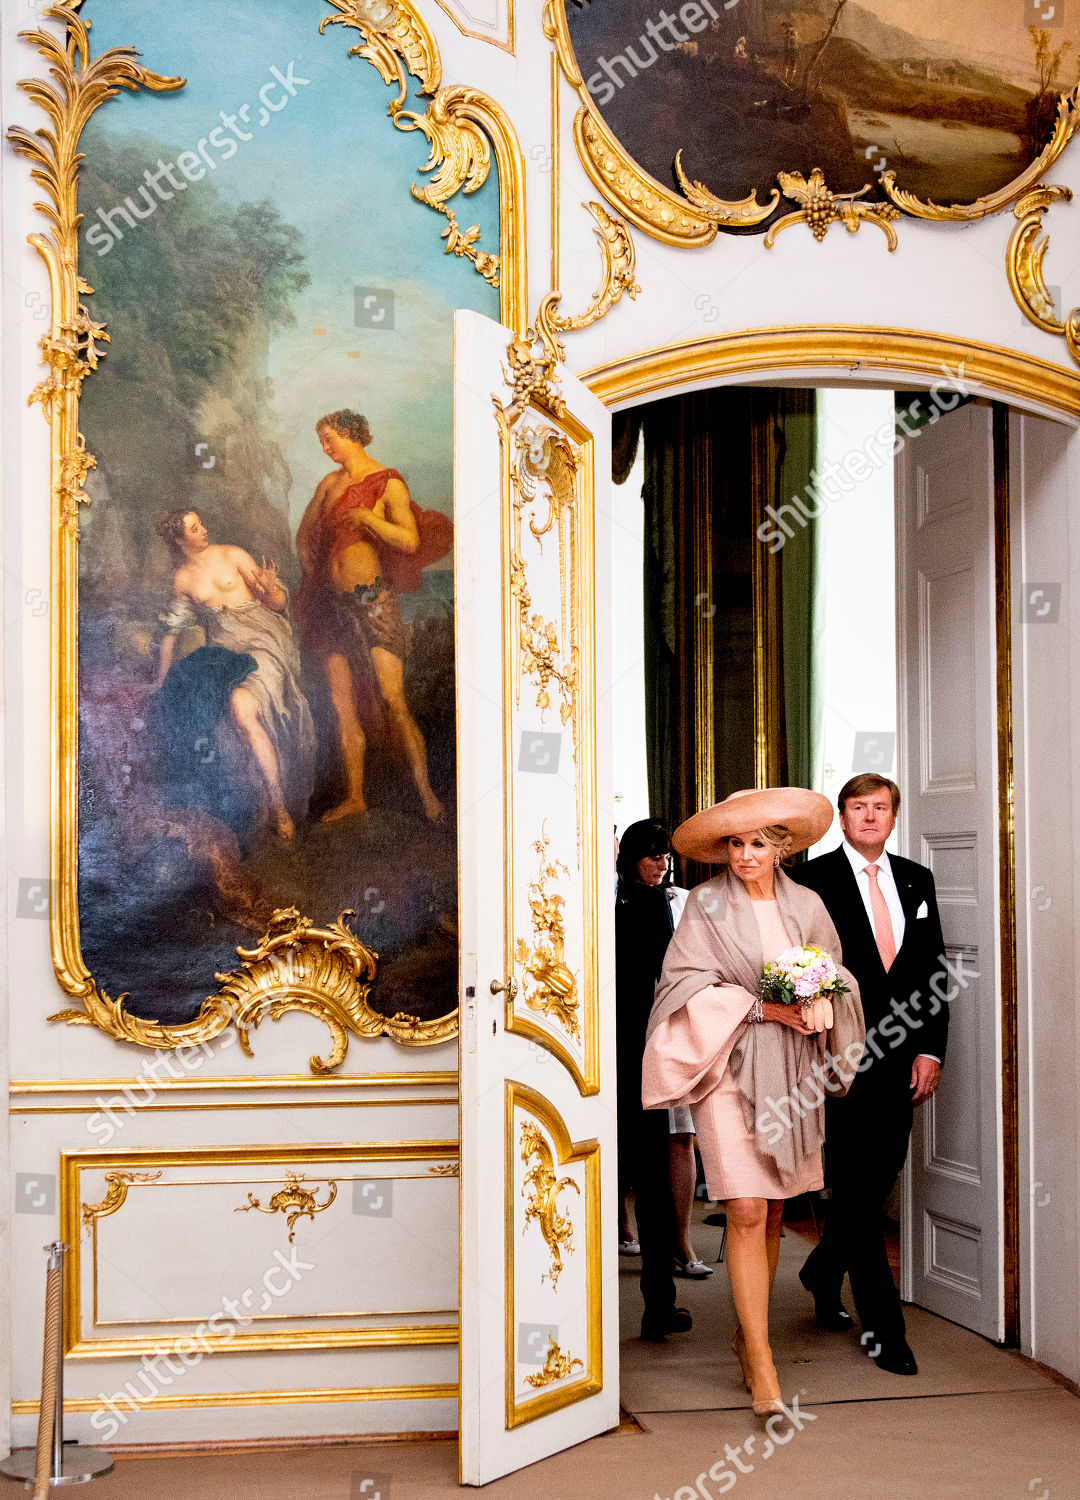 king-willem-alexander-and-queen-maxima-visit-to-germany-shutterstock-editorial-10243489bj.jpg